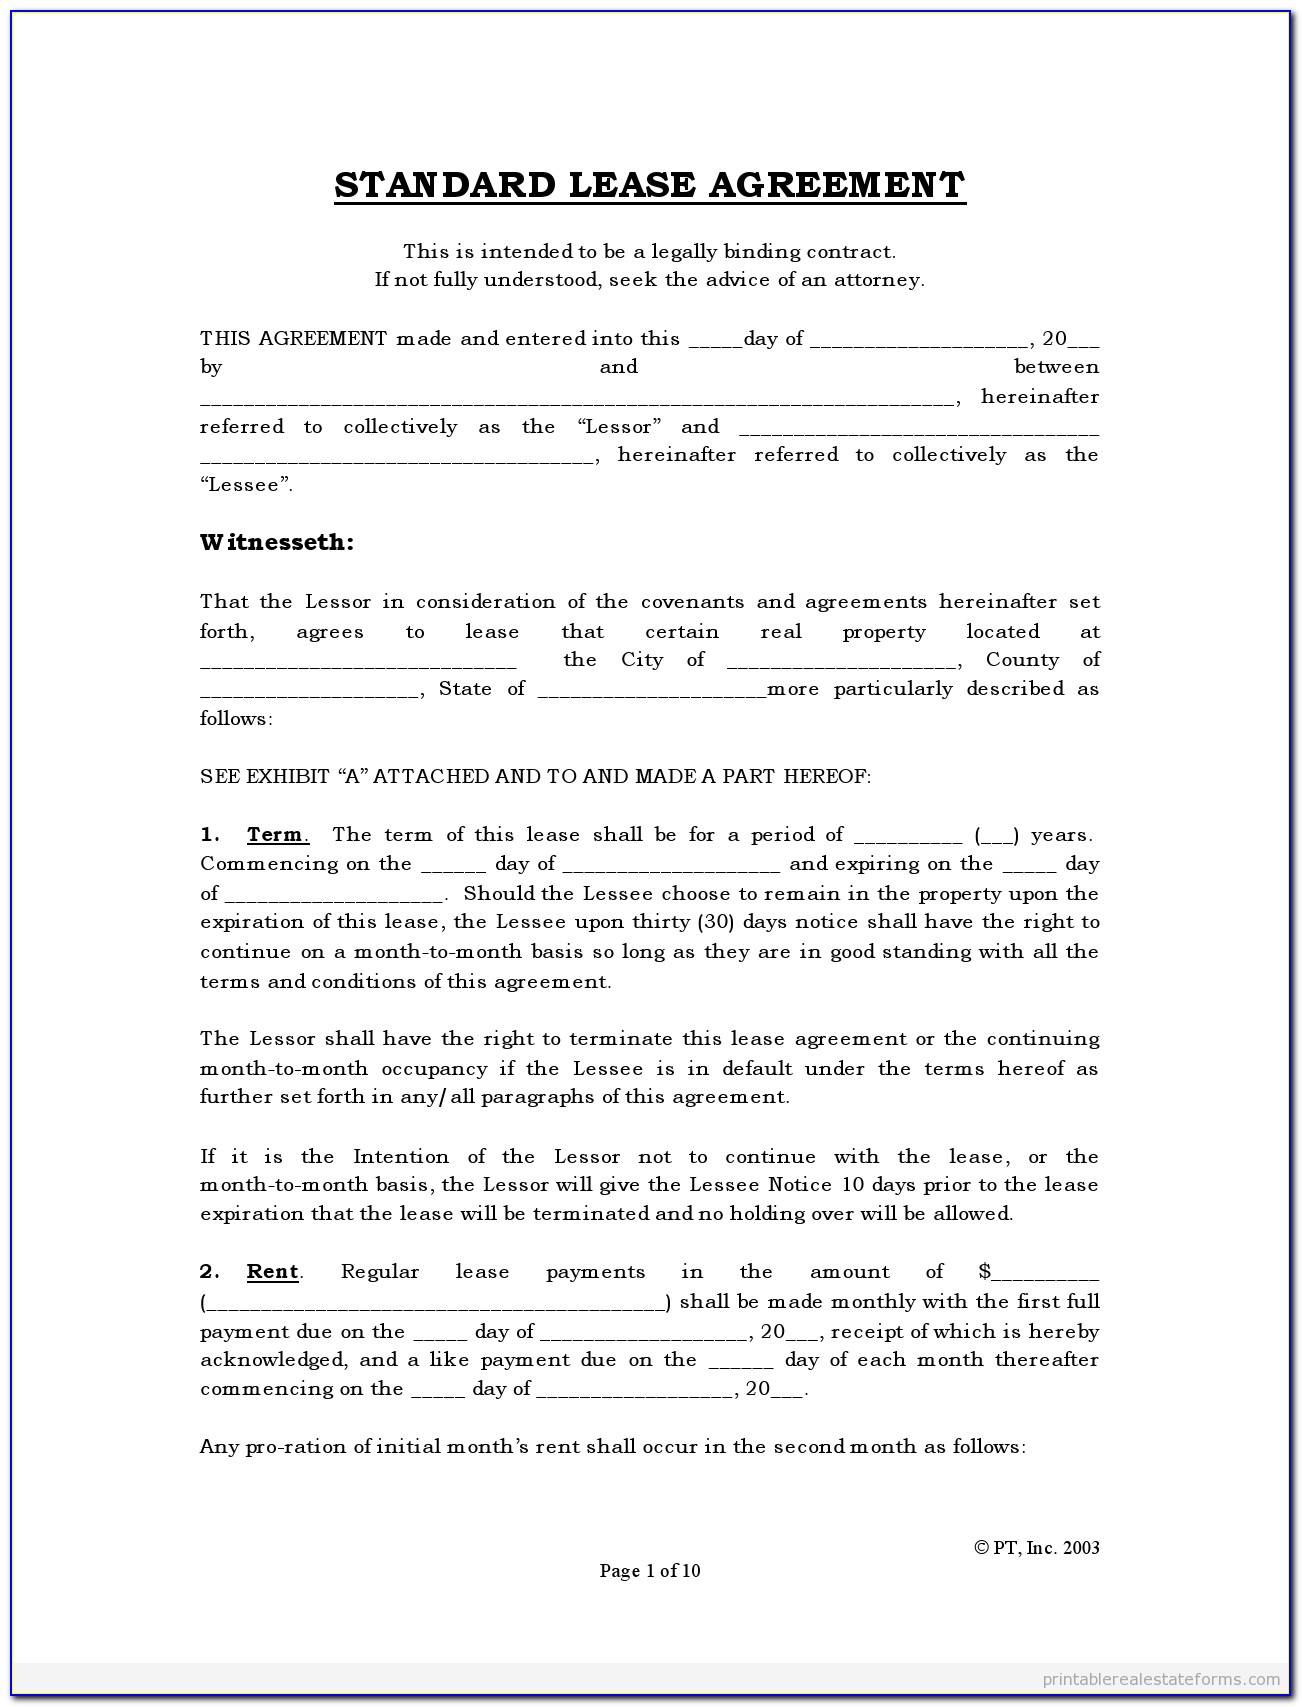 Texas Lease Agreement Form